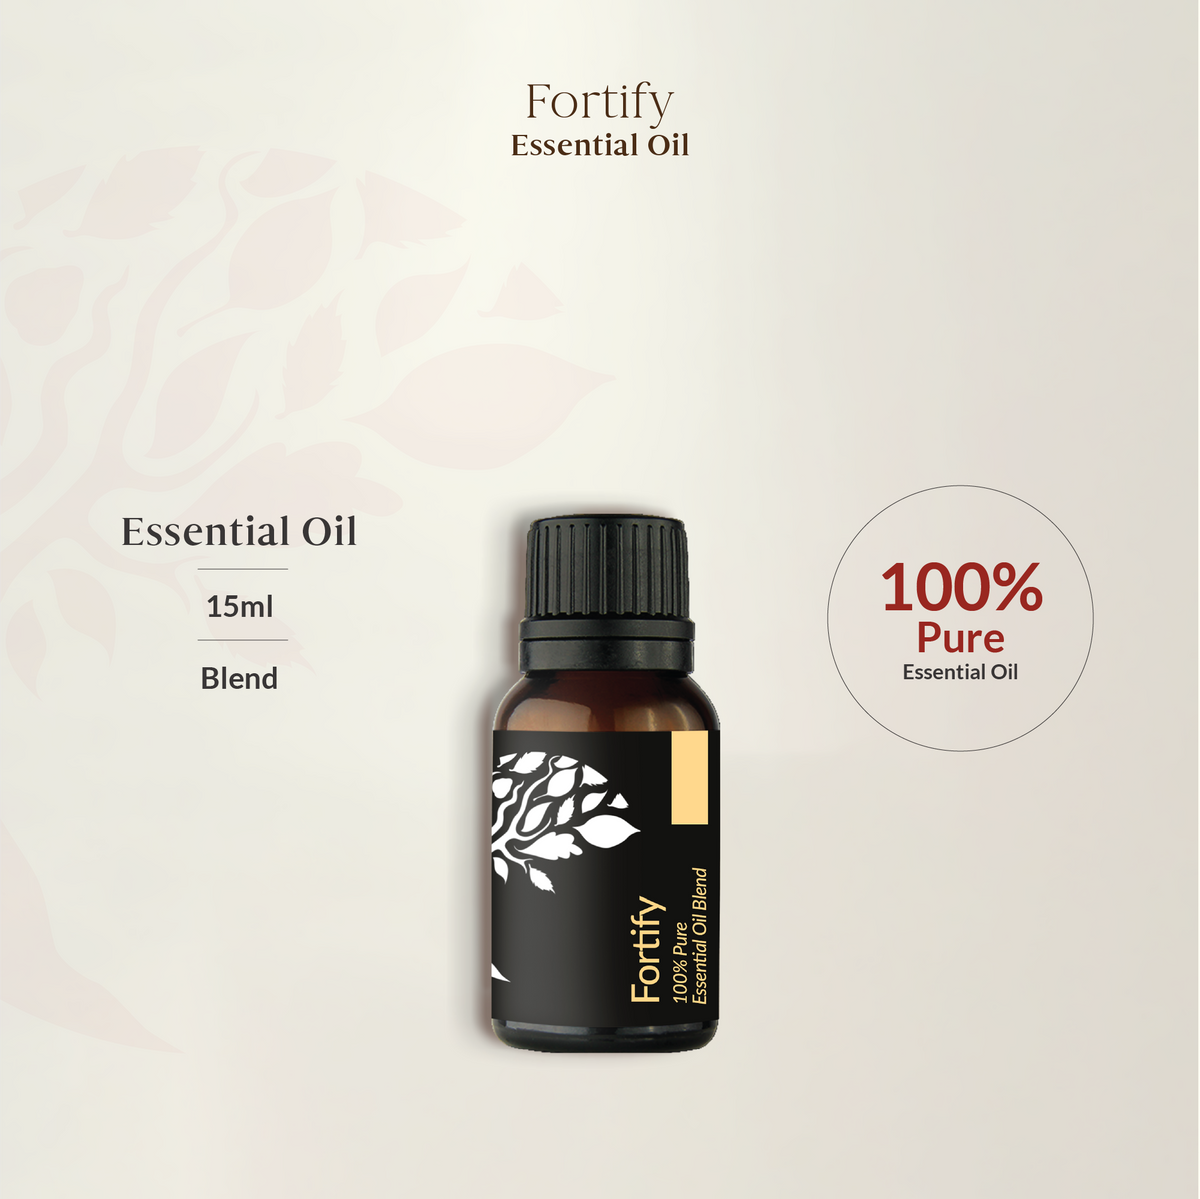 Fortify Essential Oil Blend 15ml